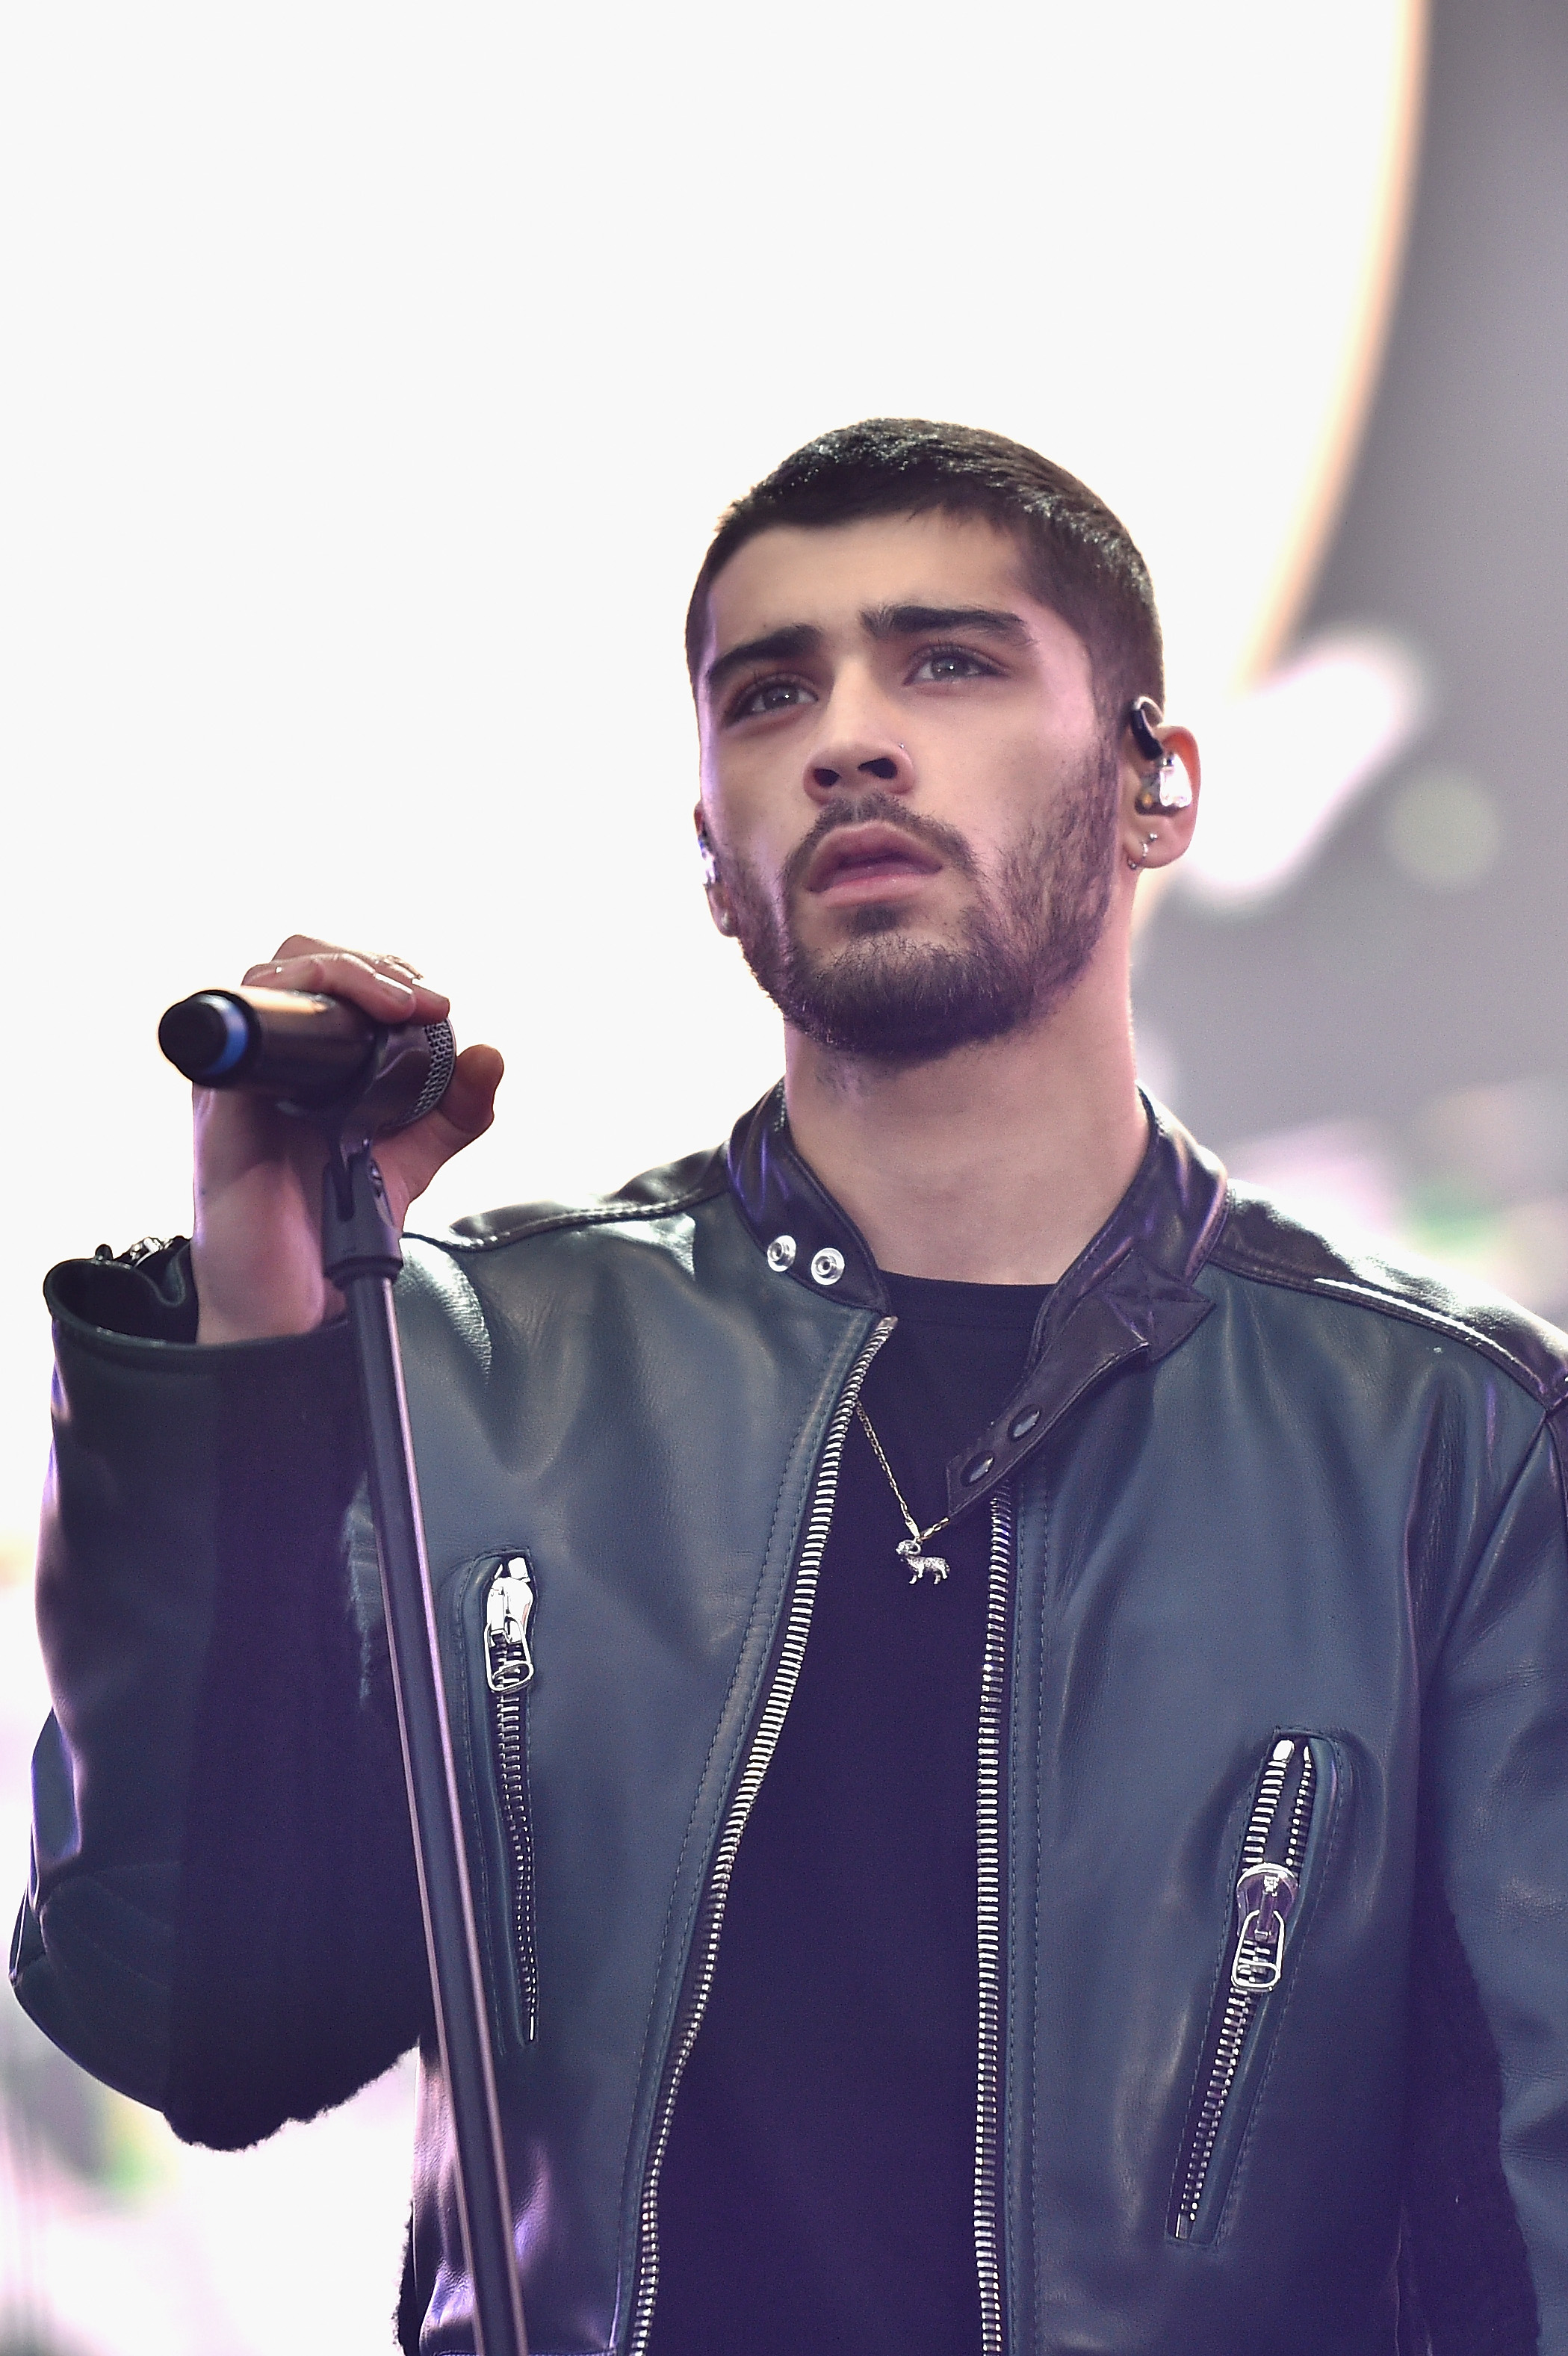 CARSON, CA - MAY 14:  Recording artist Zayn performs on stage during 102.7 KIIS FM's 2016 Wango Tango at StubHub Center on May 14, 2016 in Carson, California.  (Photo by Mike Windle/Getty Images)